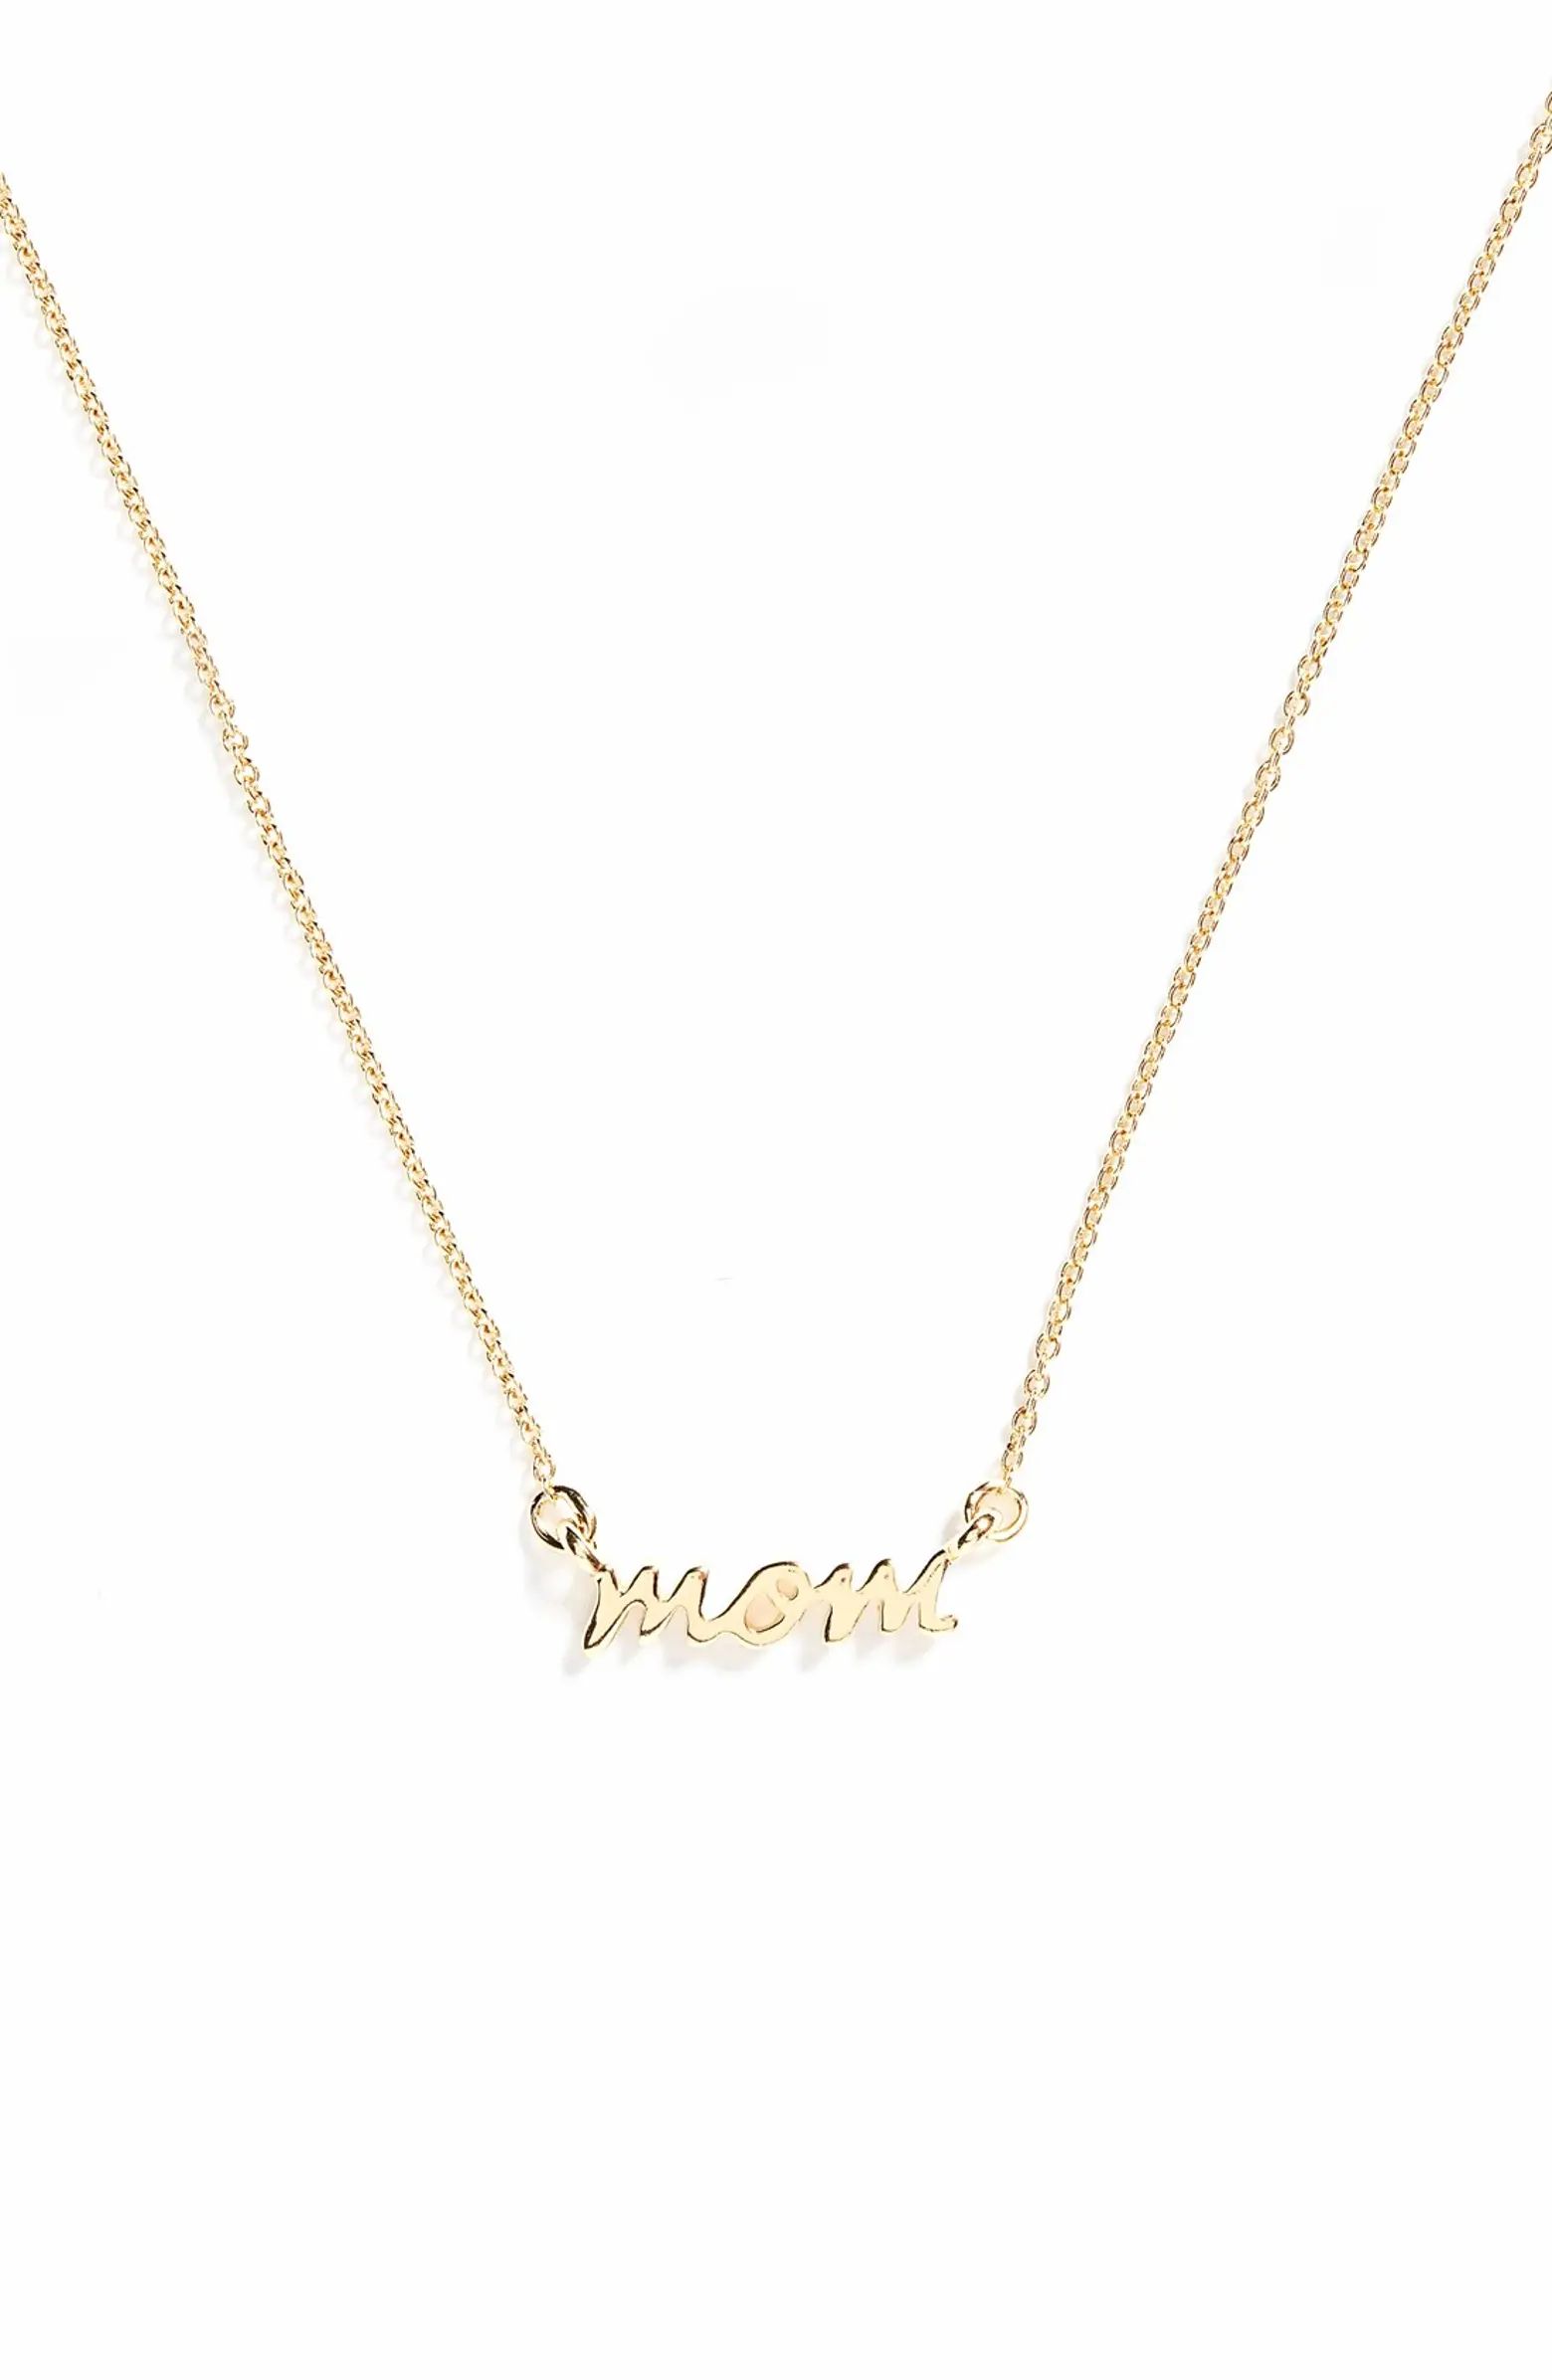 'say yes - mom' pendant necklace | Nordstrom